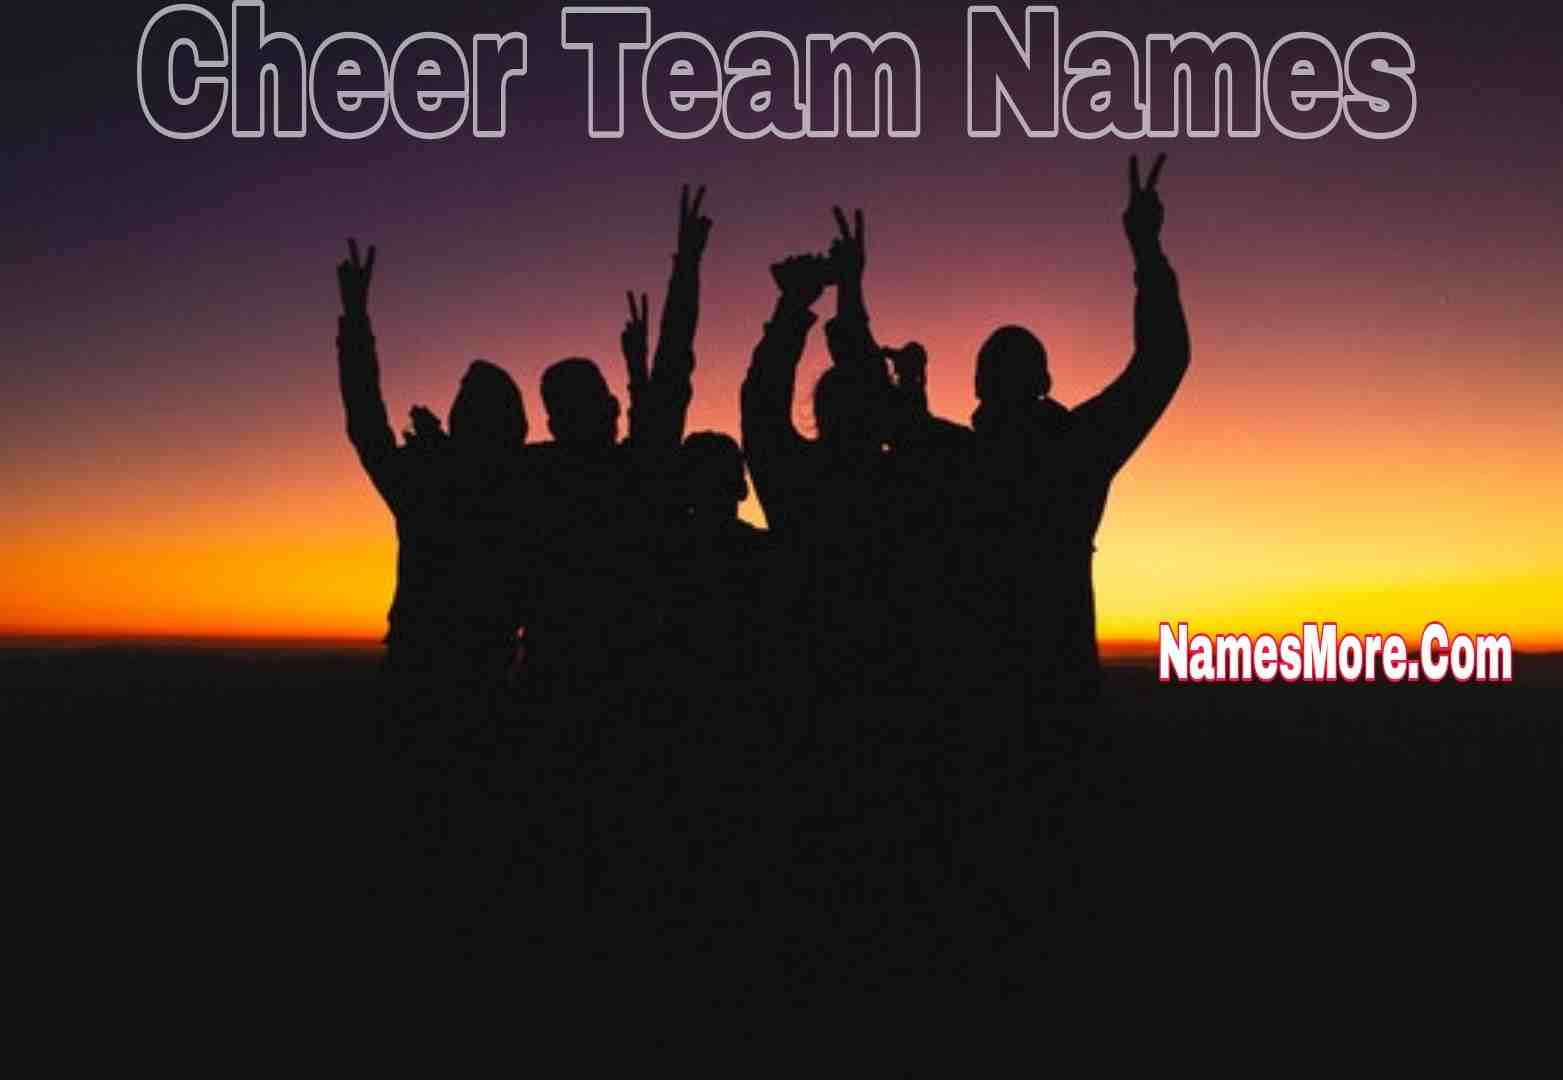 Featured Image for 800+ Cheer Team Names [All-Star And Top]